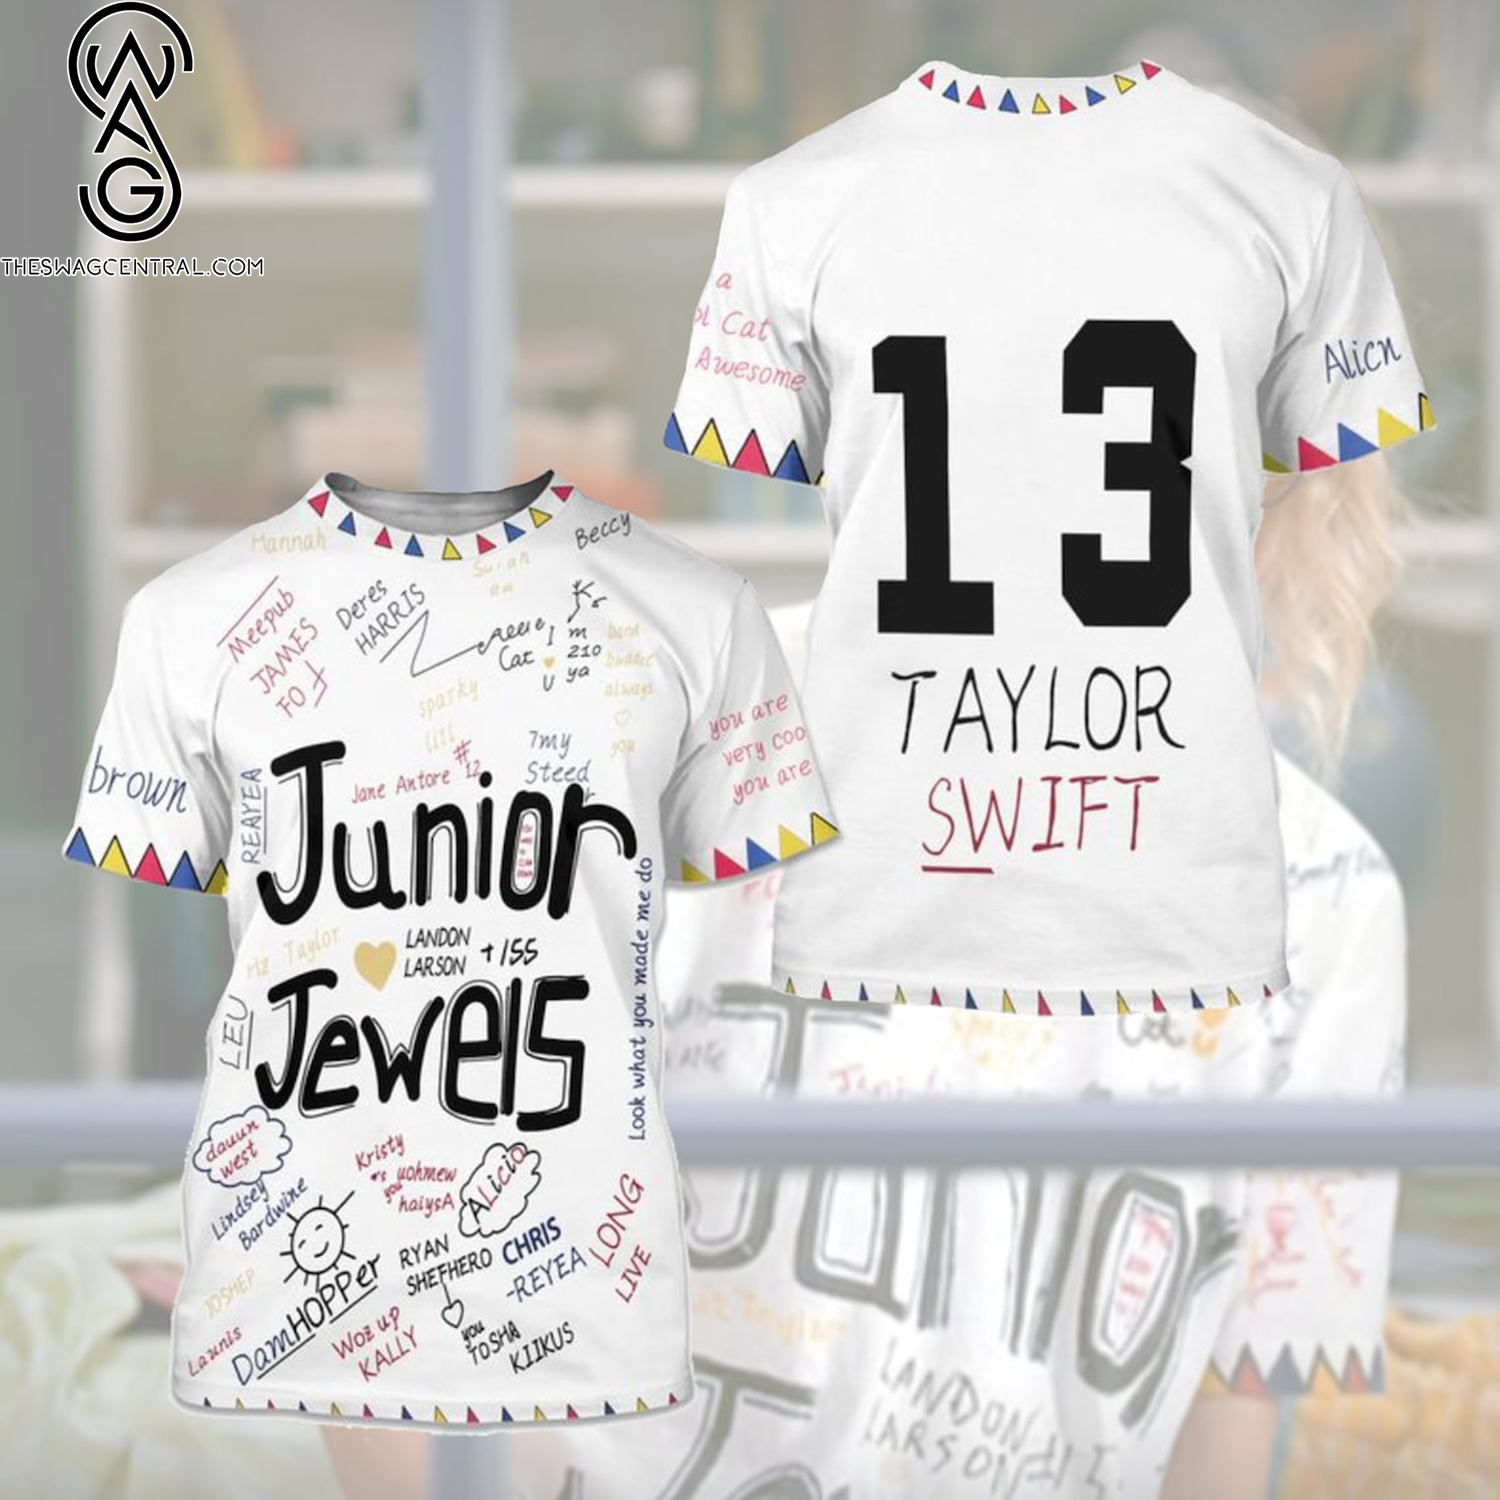 You Belong With Me Outfit Junior Jewels Taylor Swift The Eras Tour Shirt